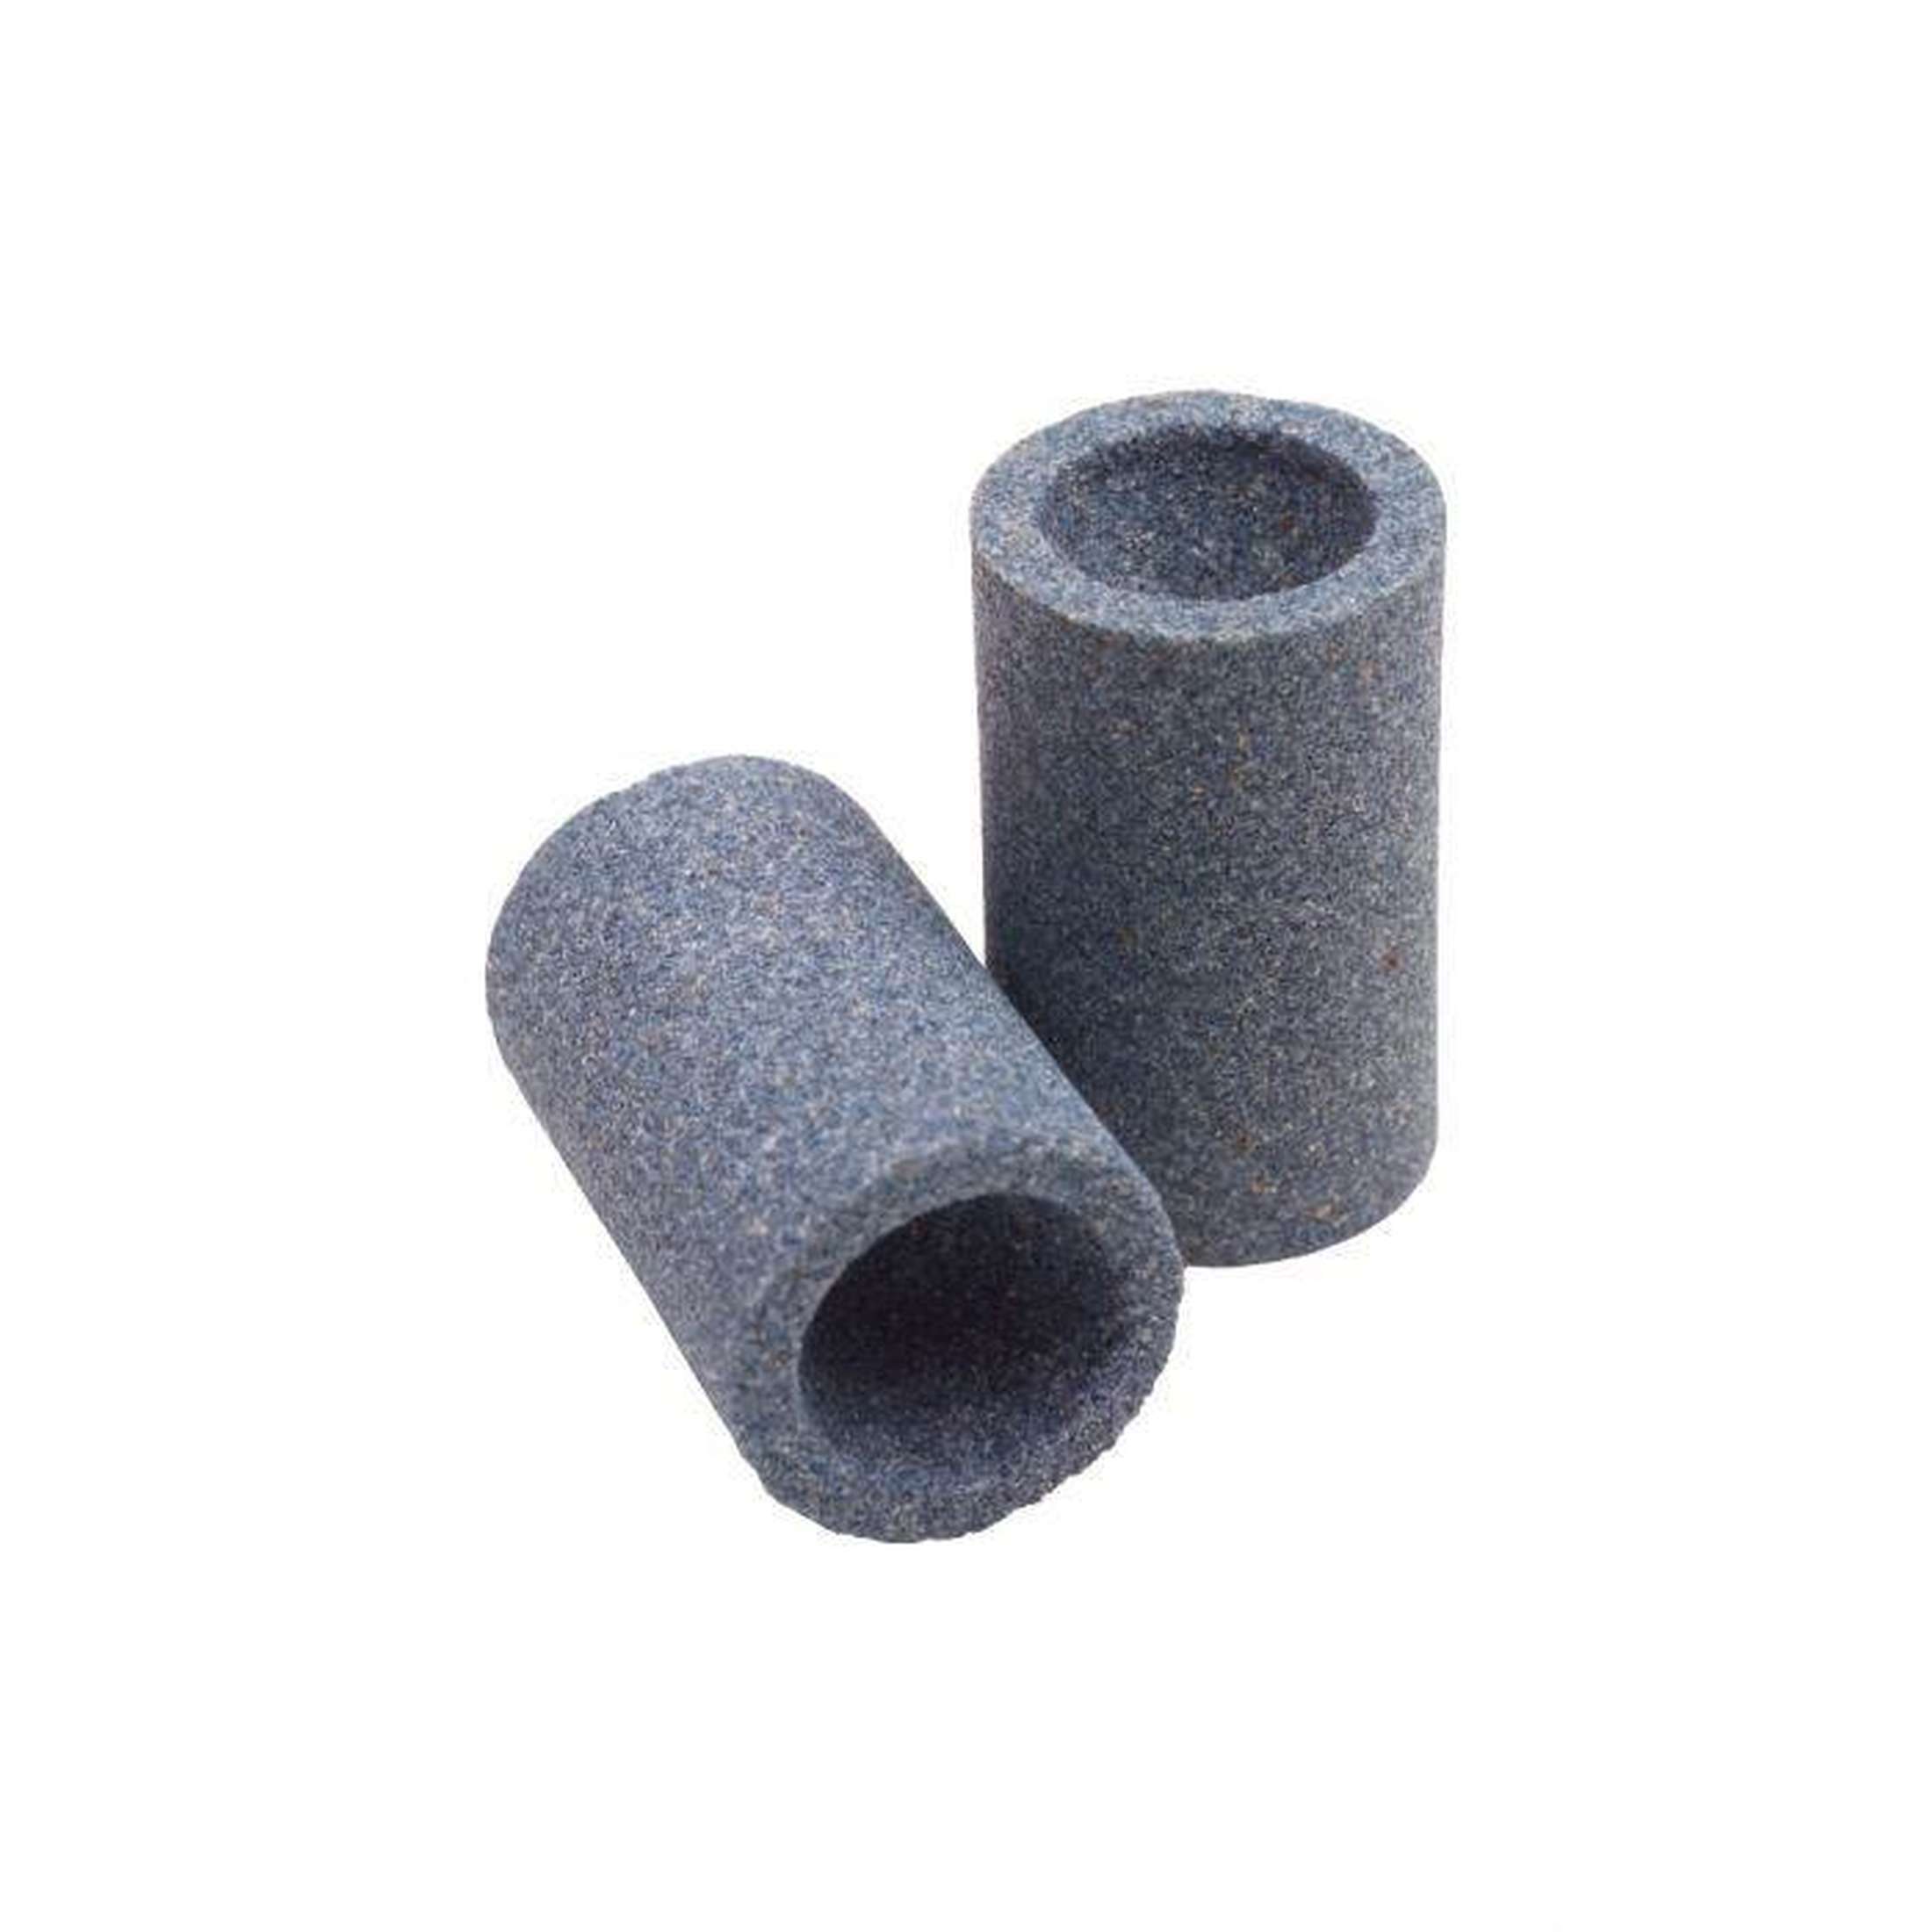 Grinding Stone for Steel Dart Points-1